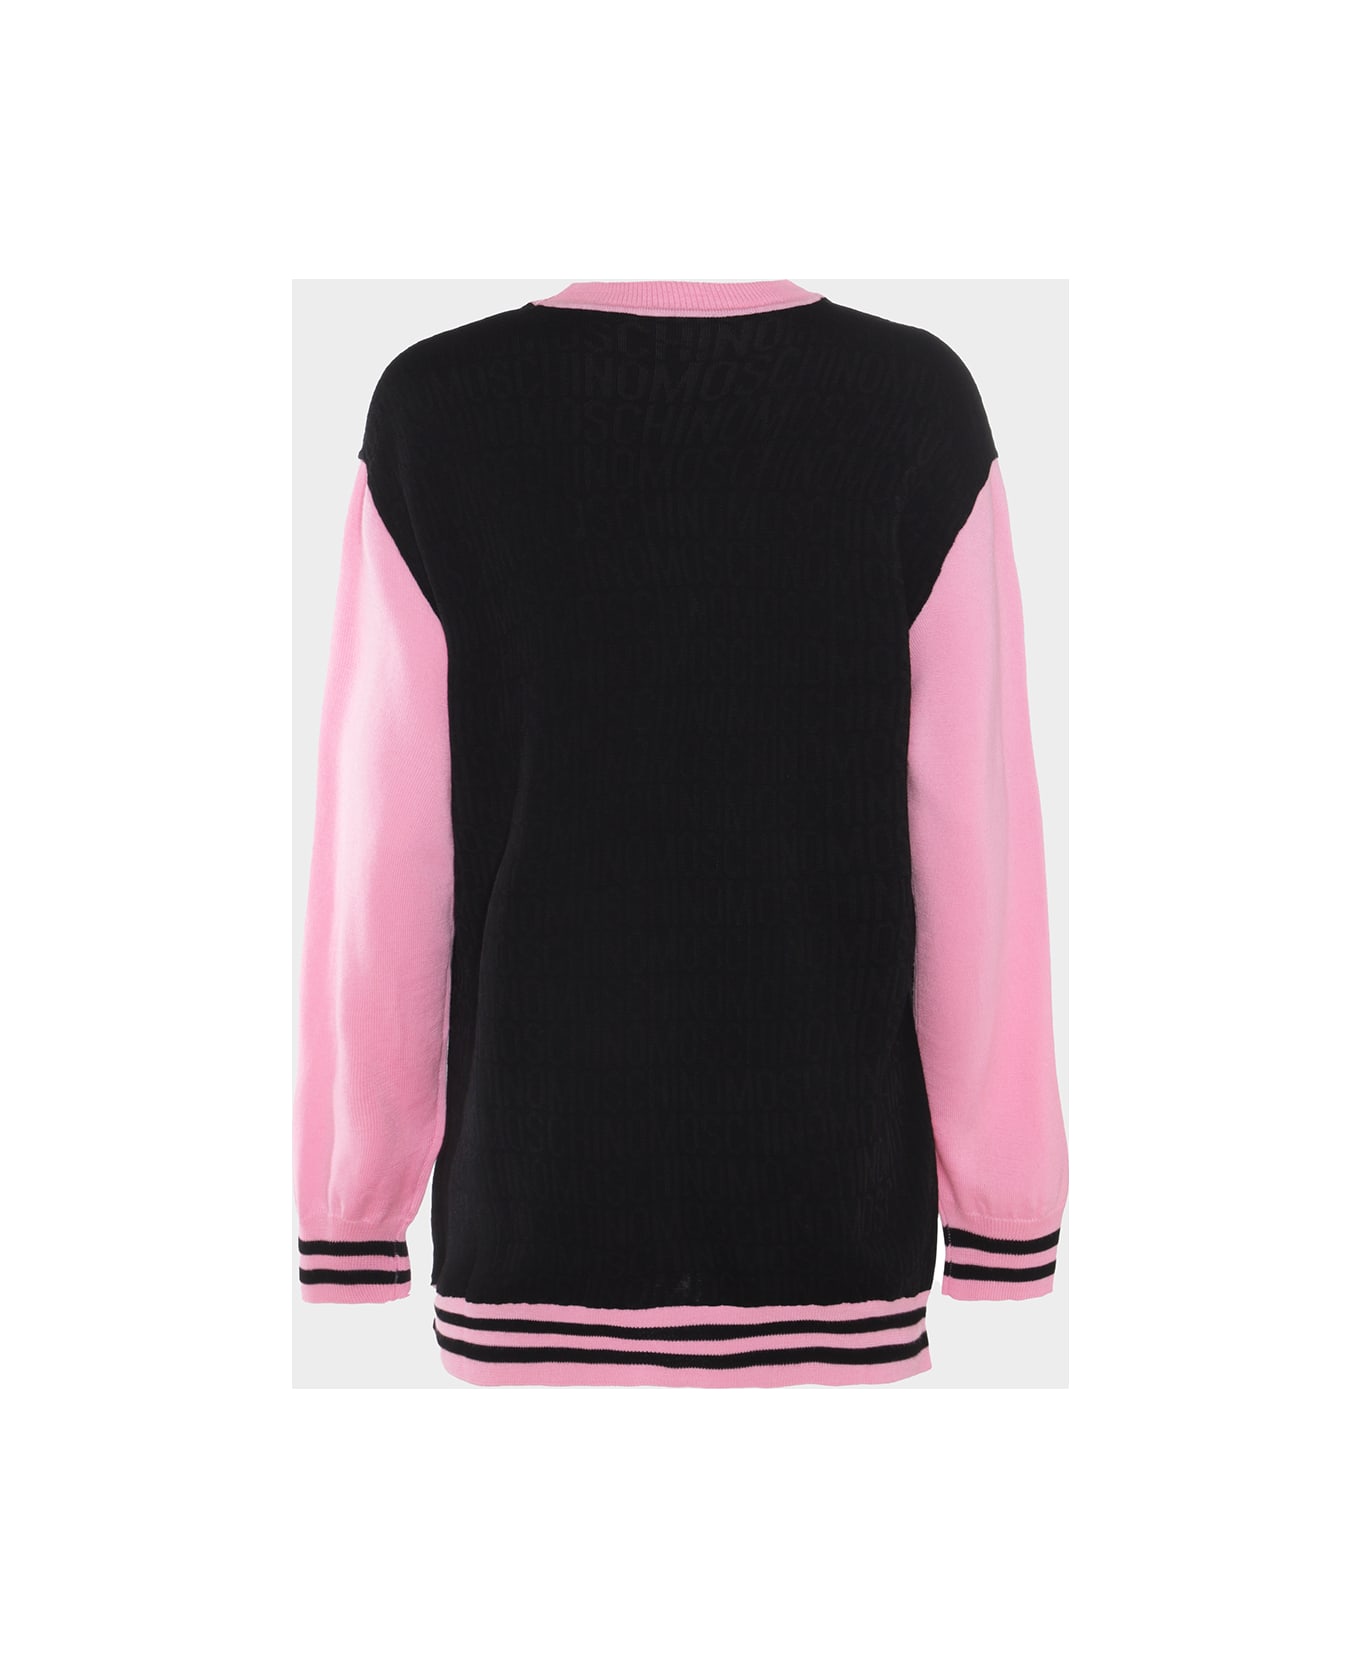 Moschino Black And Pink Wool Knitwear - Black カーディガン